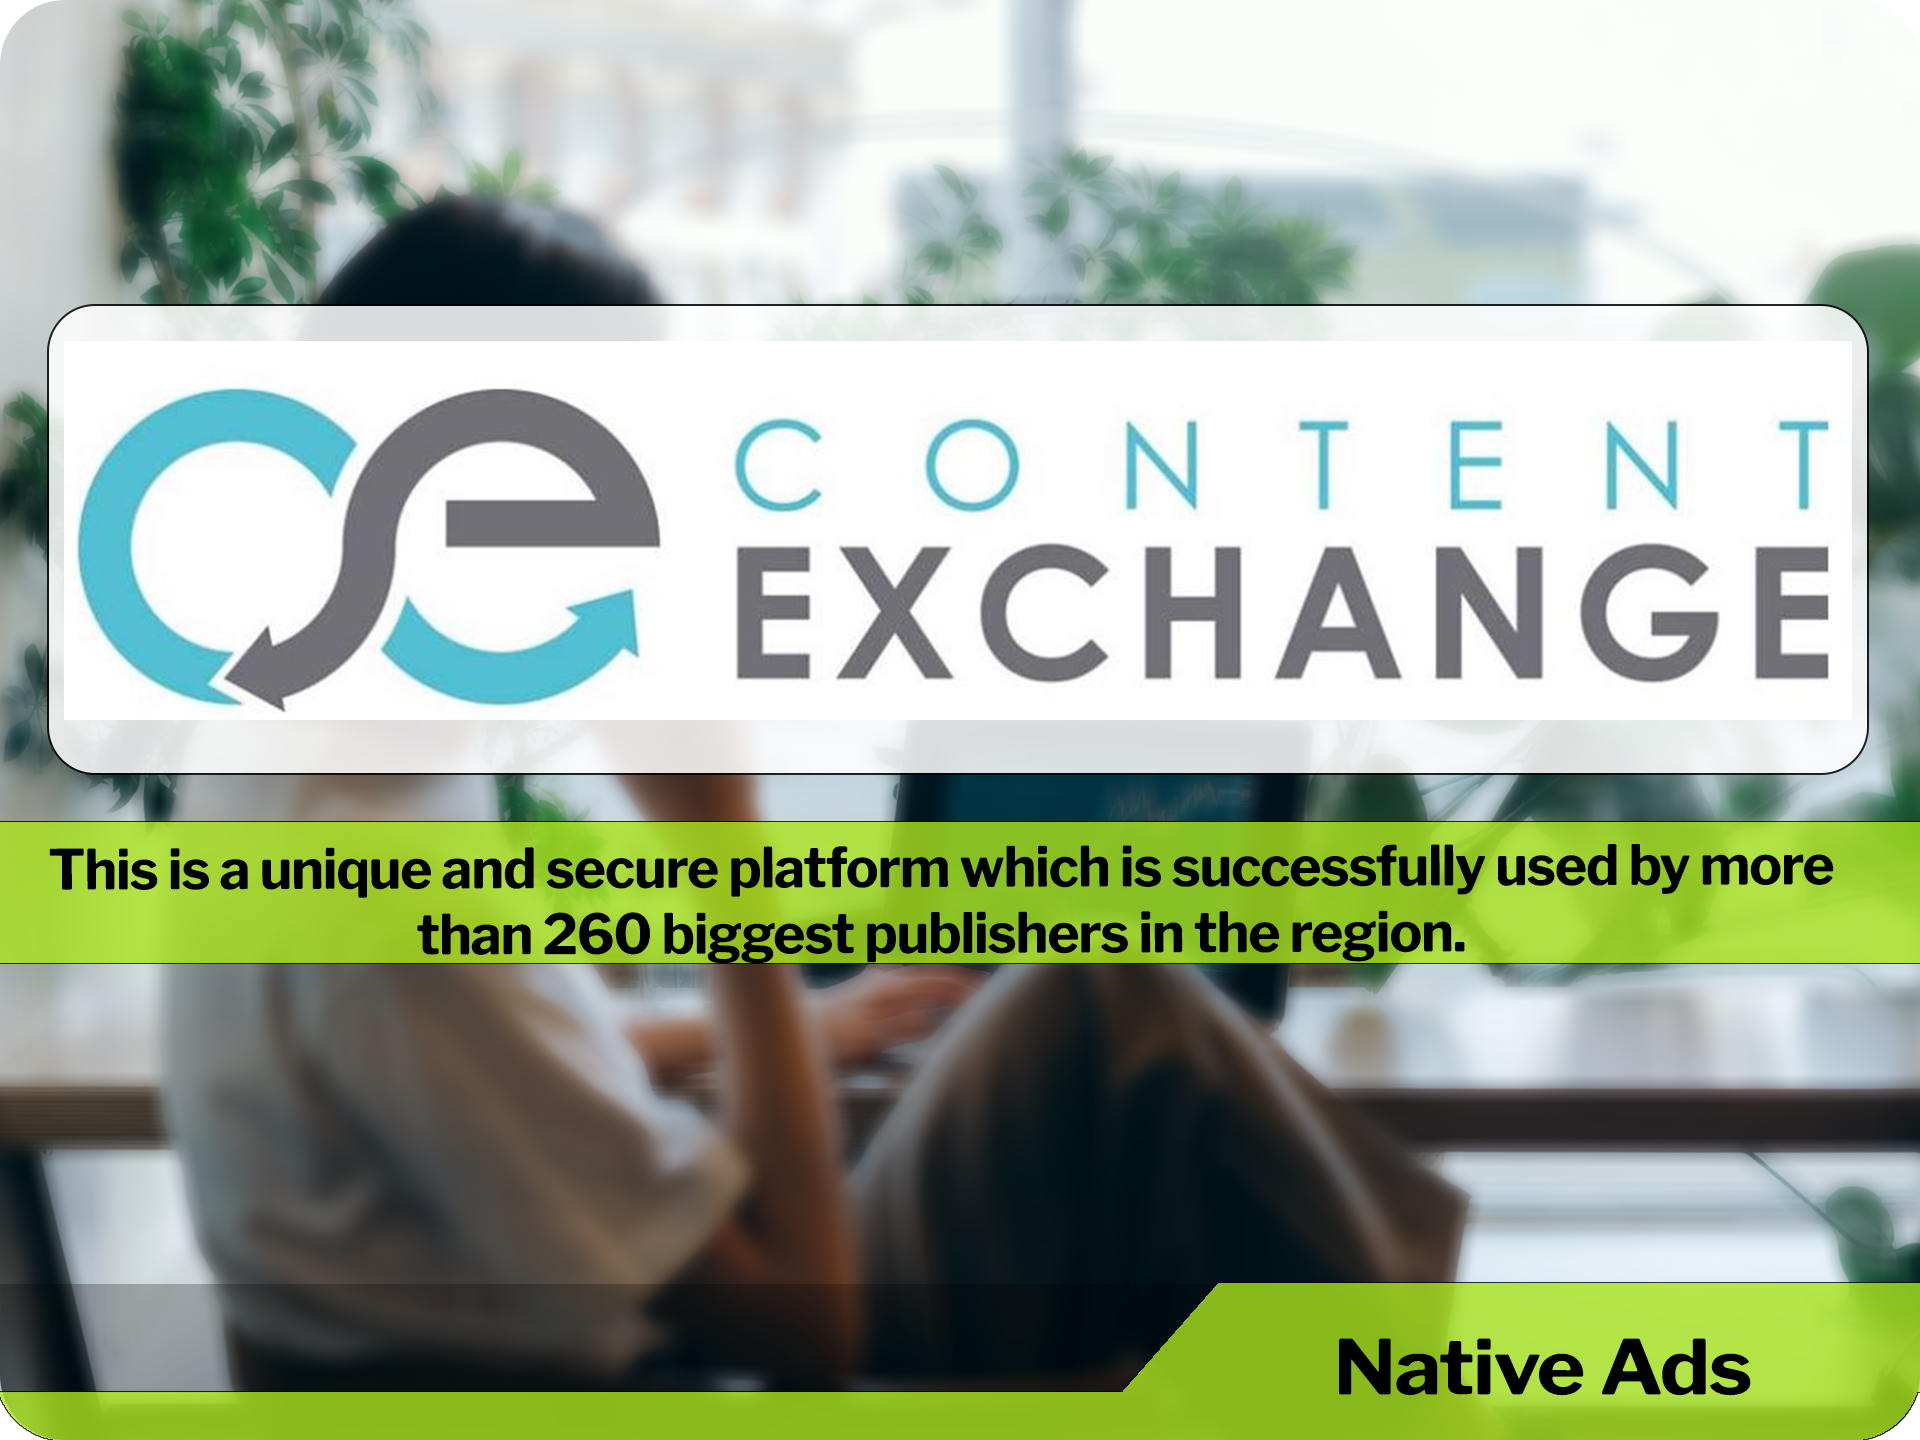 ContentExchange includes only websites with great content